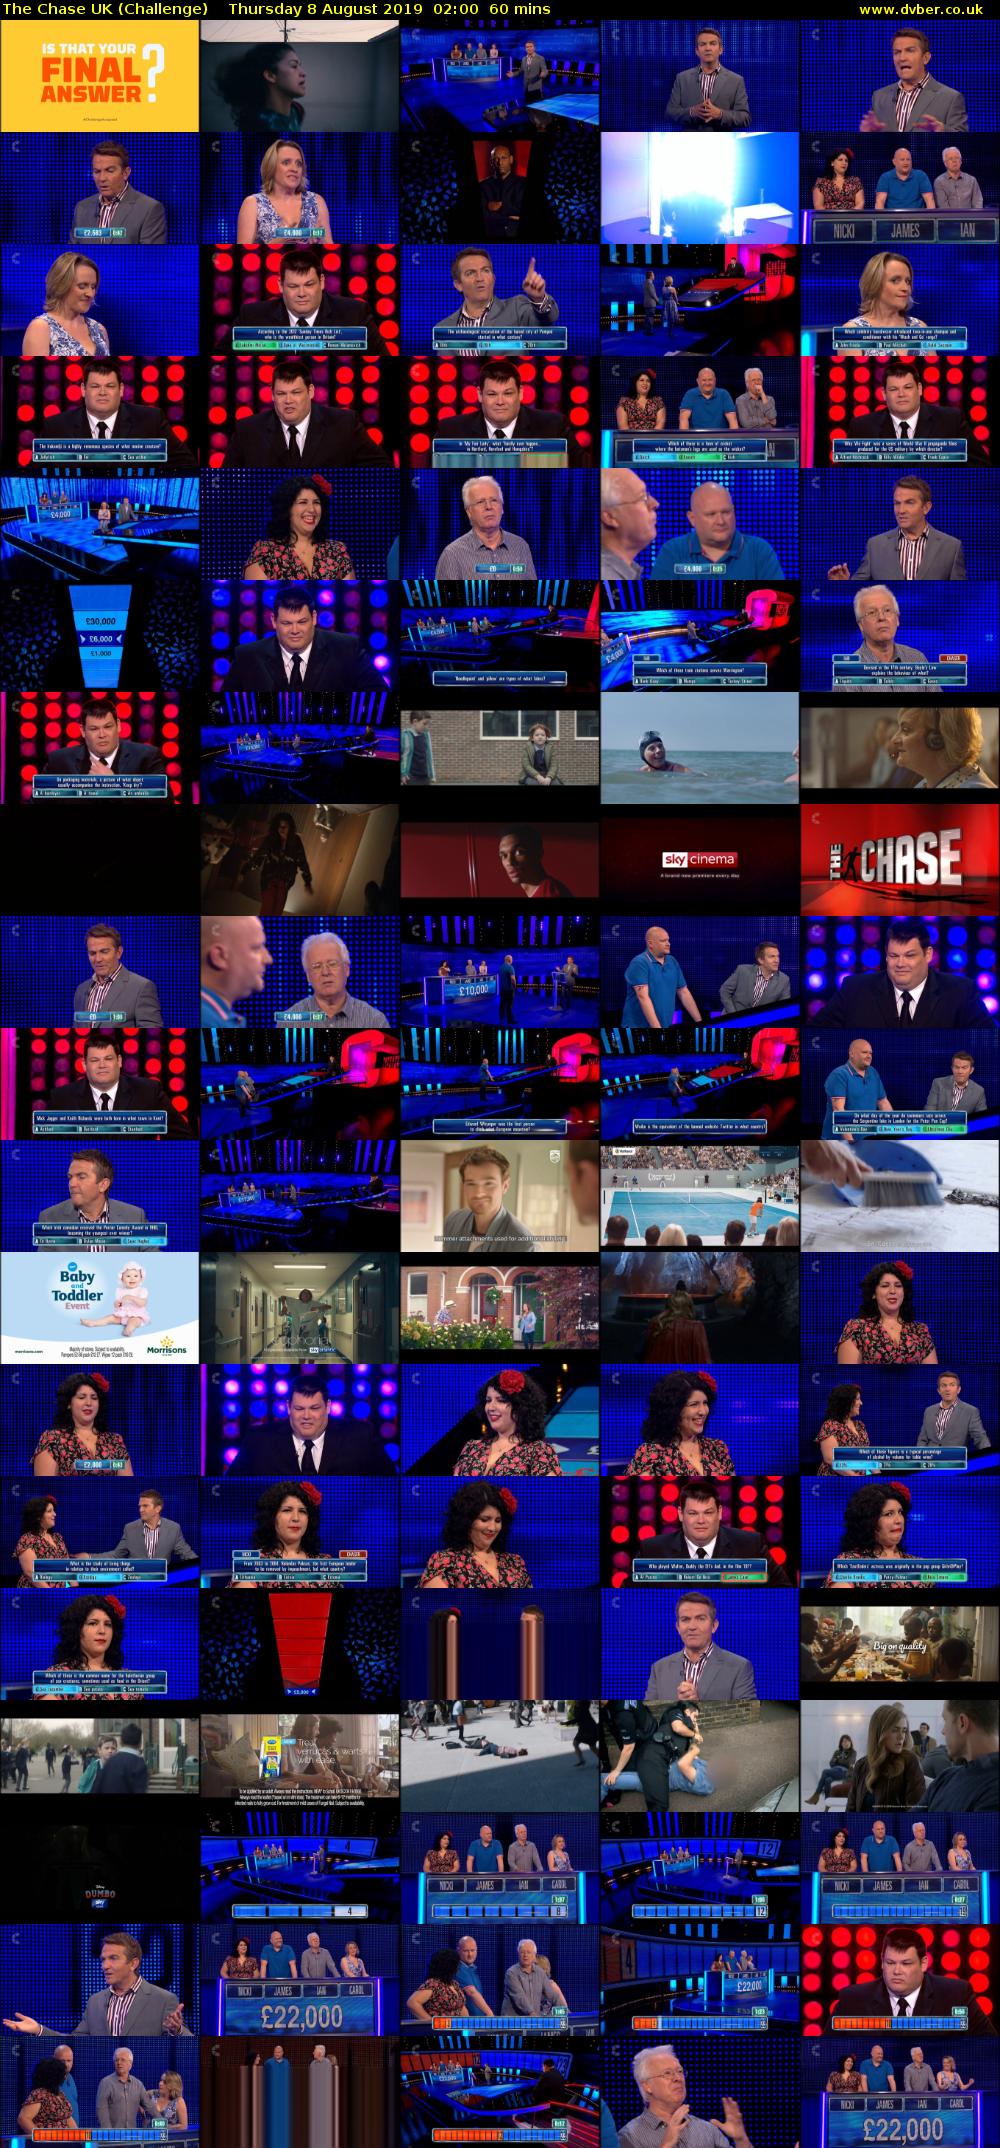 The Chase UK (Challenge) Thursday 8 August 2019 02:00 - 03:00